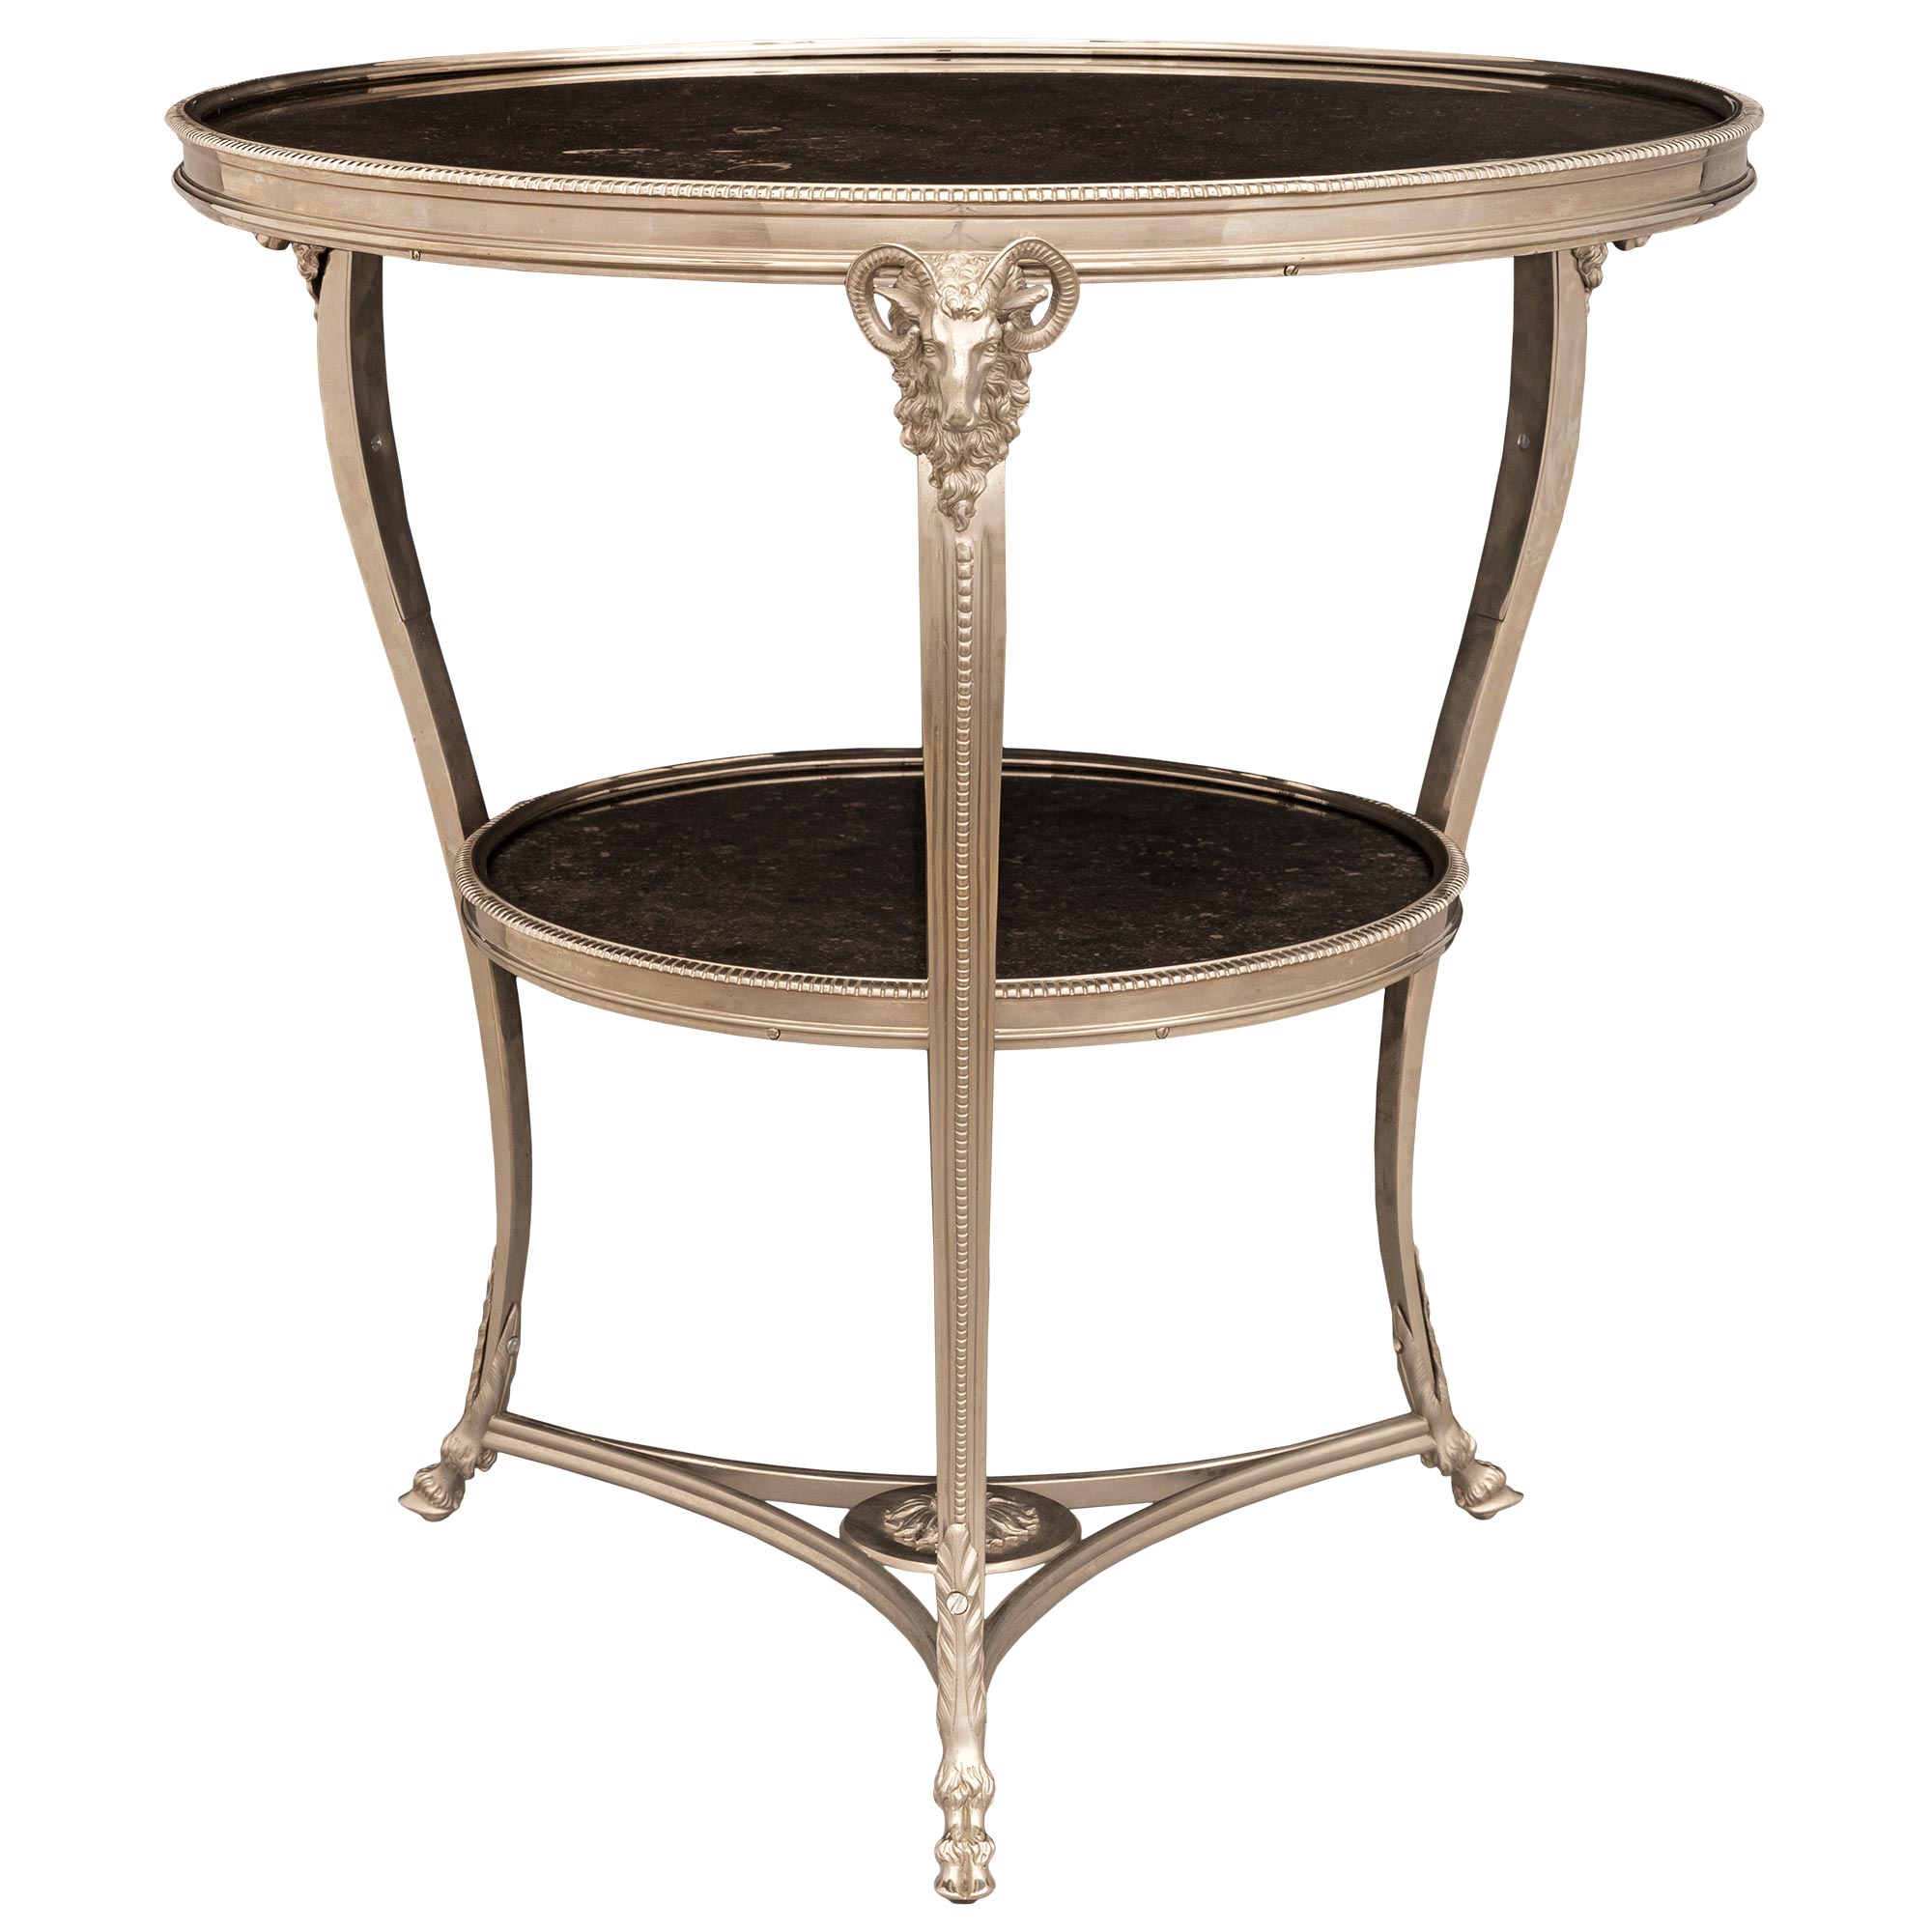 French 19th Century Louis XVI St. Silvered Bronze And Marble Guéridon Side Table For Sale